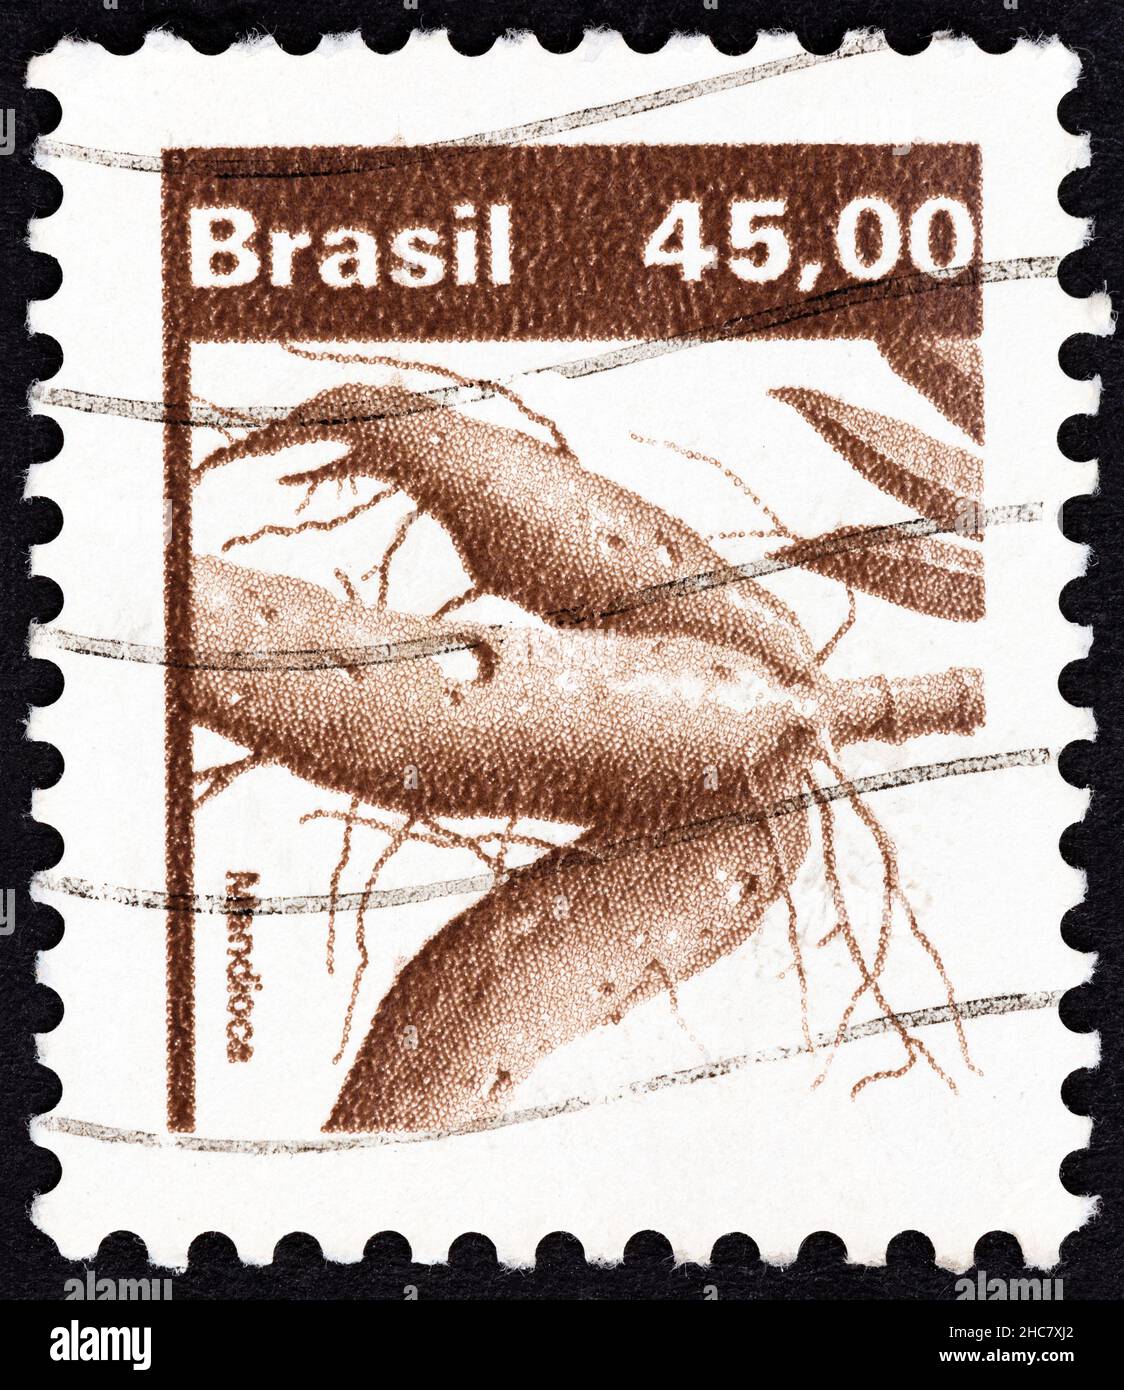 BRAZIL - CIRCA 1983: A stamp printed in Brazil from the 'Agricultural Products' issue shows Manioc (Manihot esculenta), circa 1983. Stock Photo